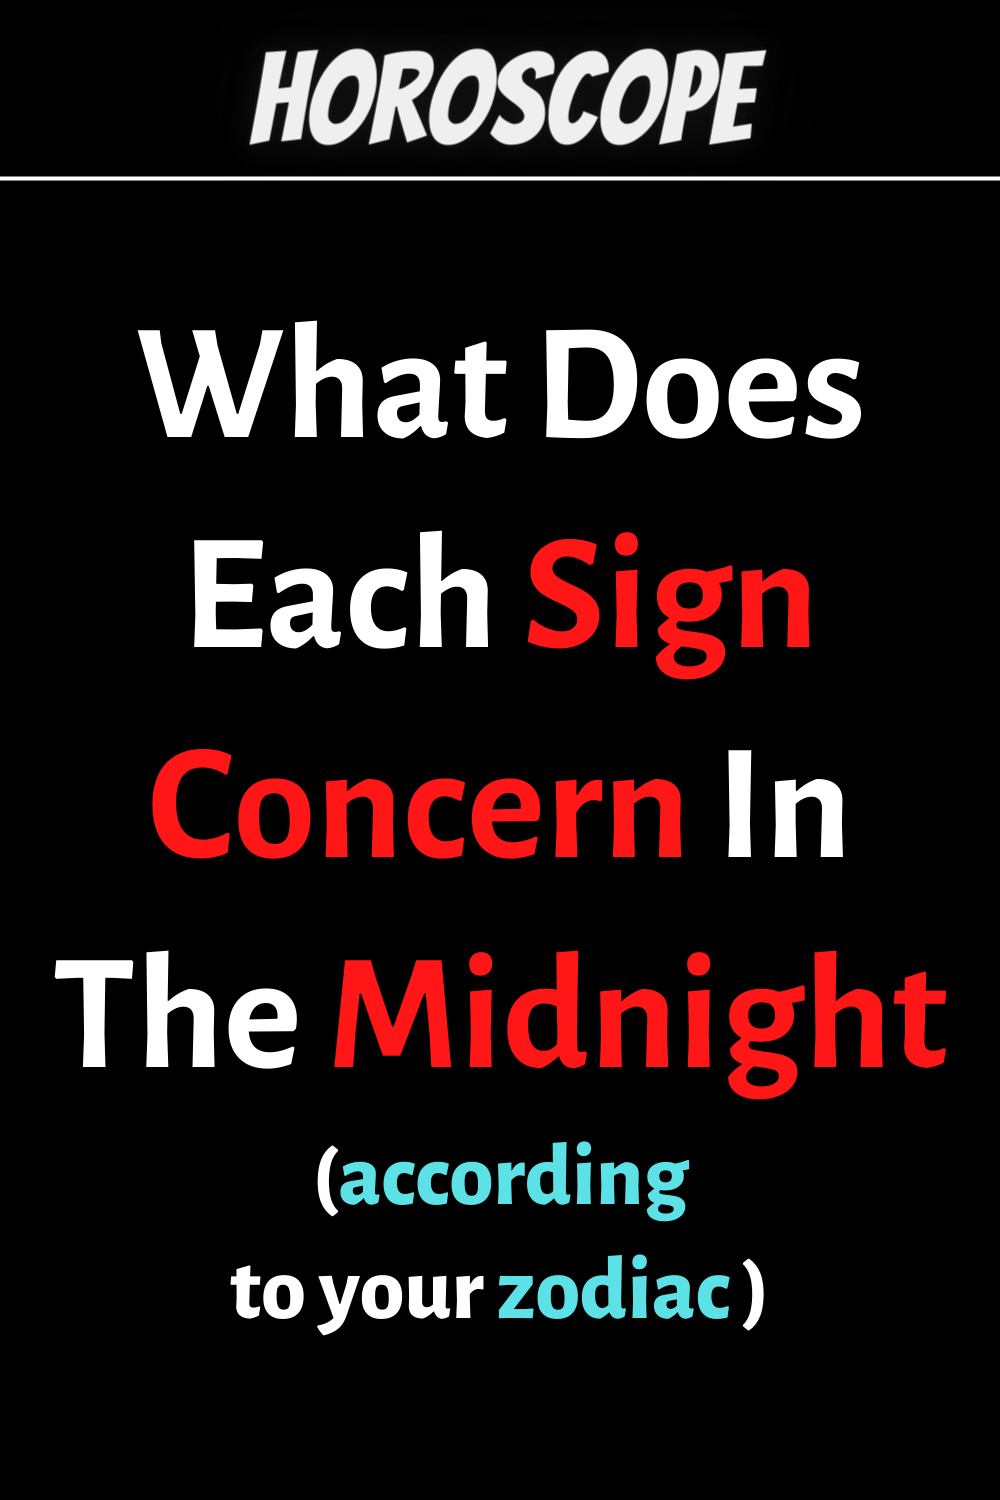 What Does Each Sign Concern In The Midnight